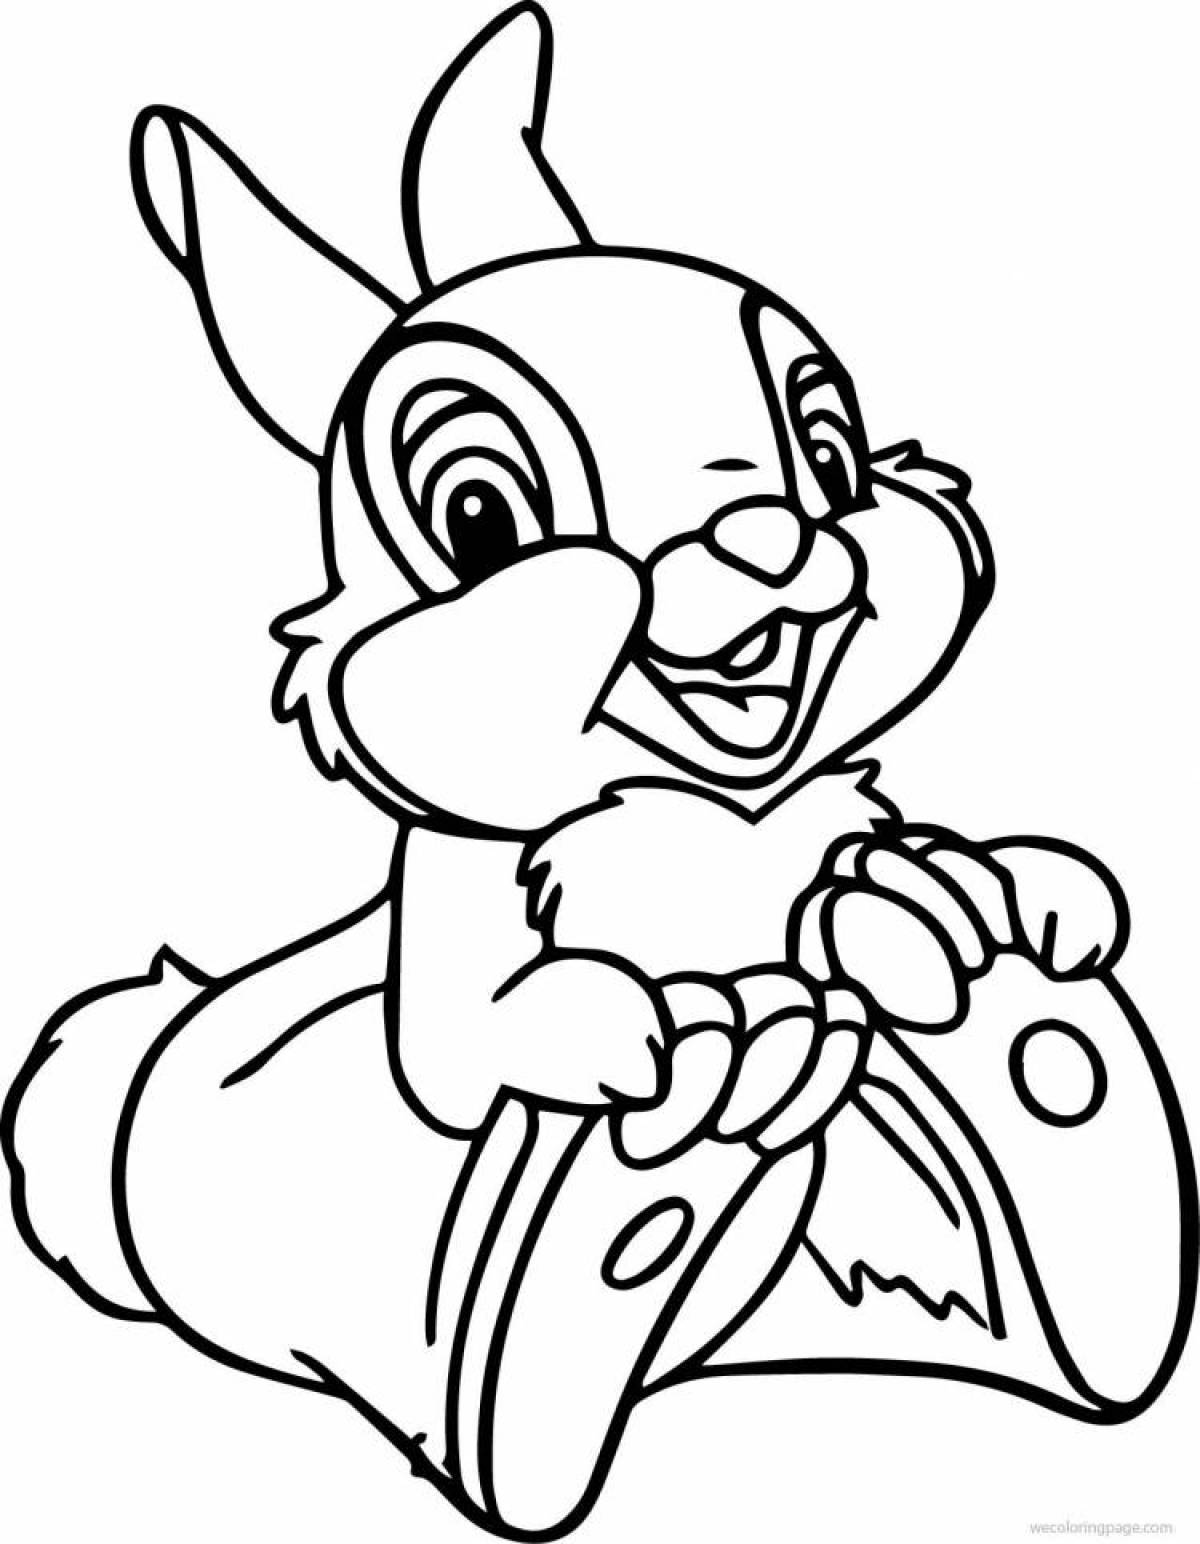 Coloring book New Year's hare filled with colors